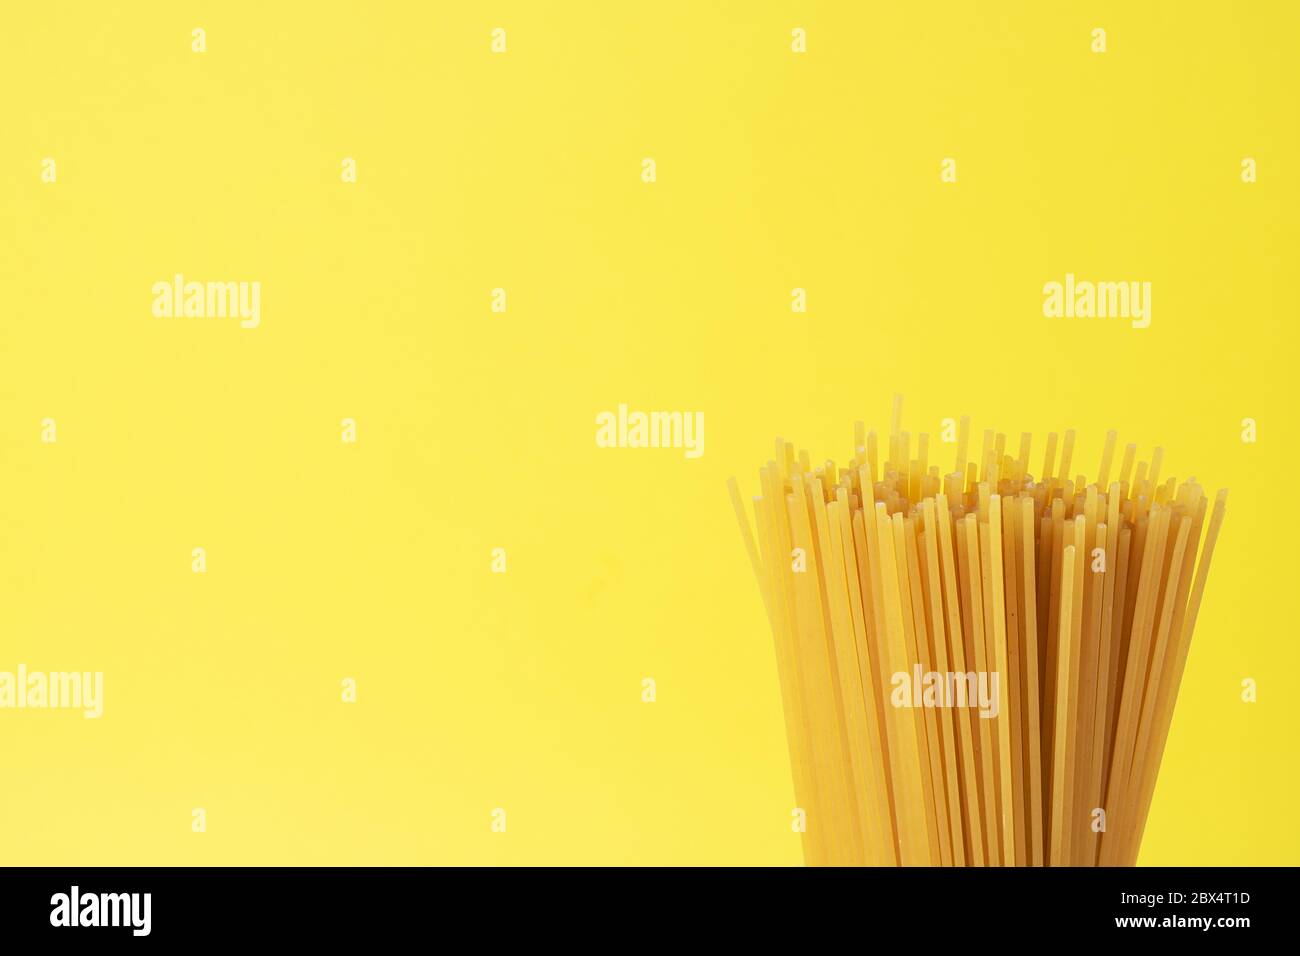 Dry pasta spaghetti on a yellow background. Copy space Stock Photo